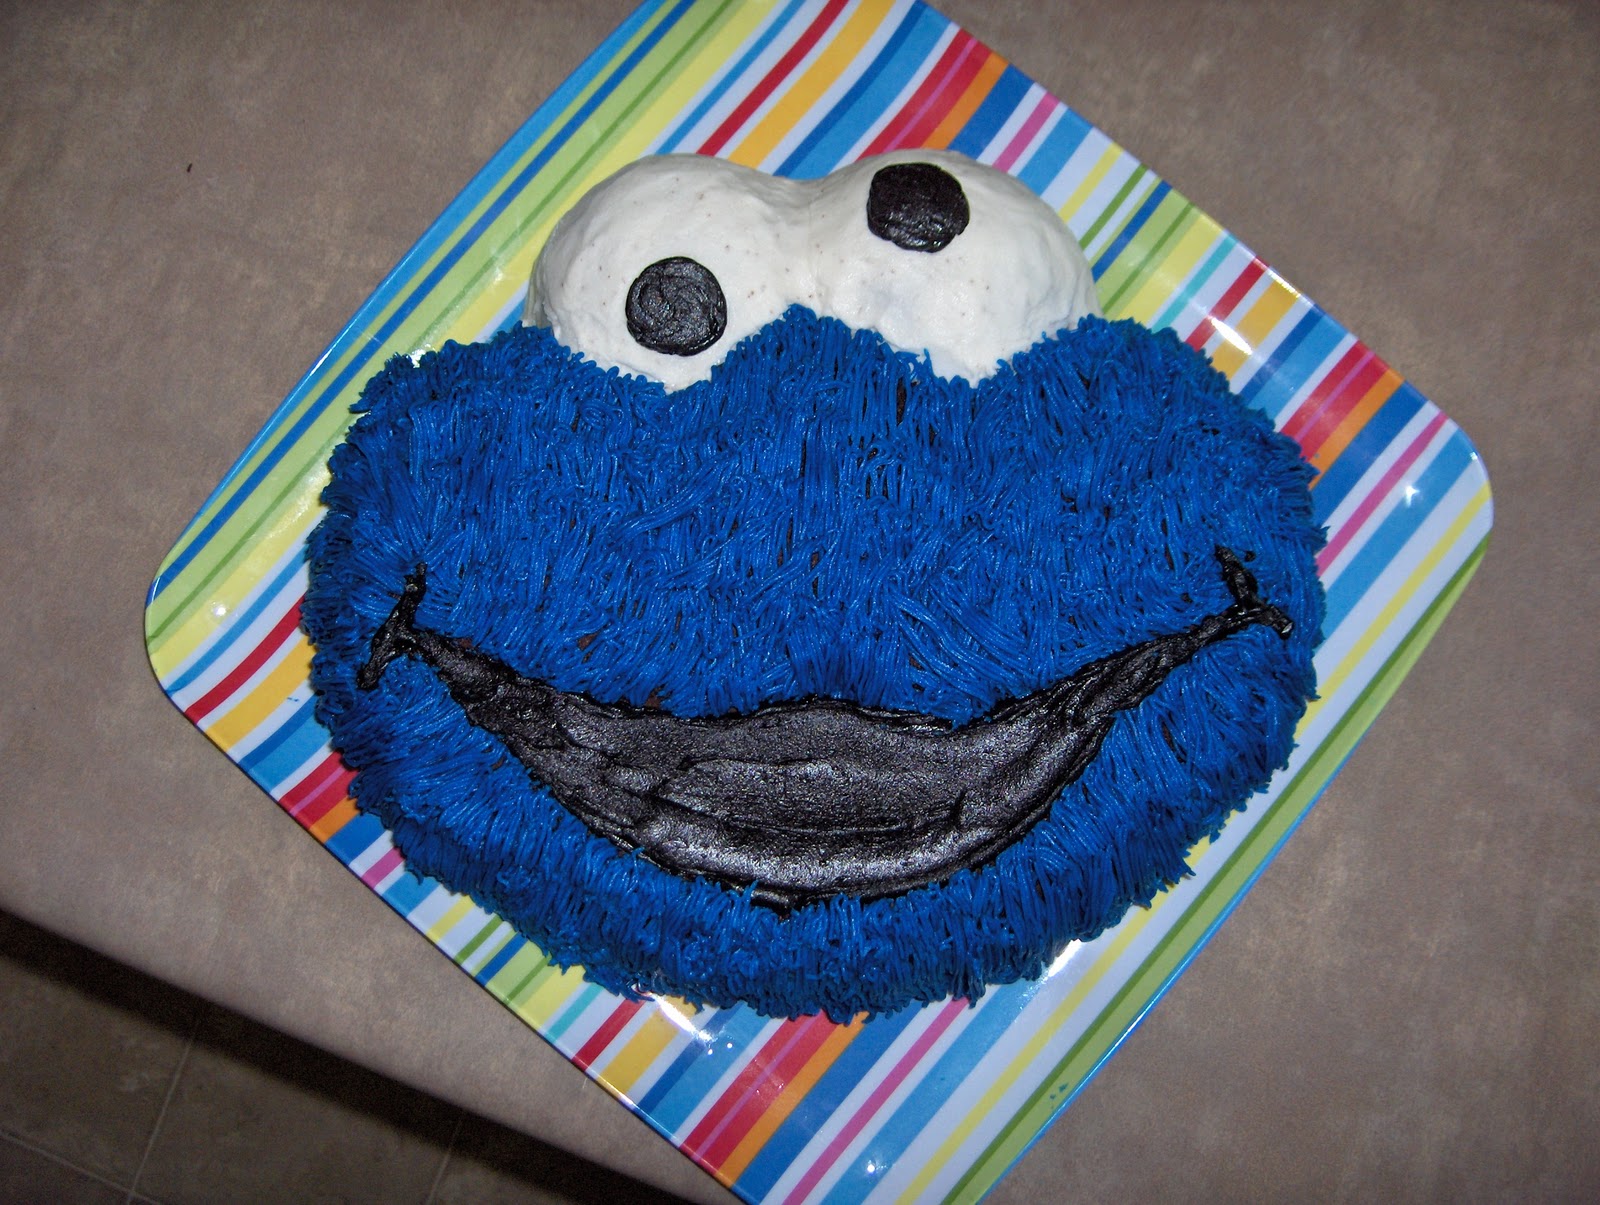 Attempting Green: How to make a Cookie Monster Cake